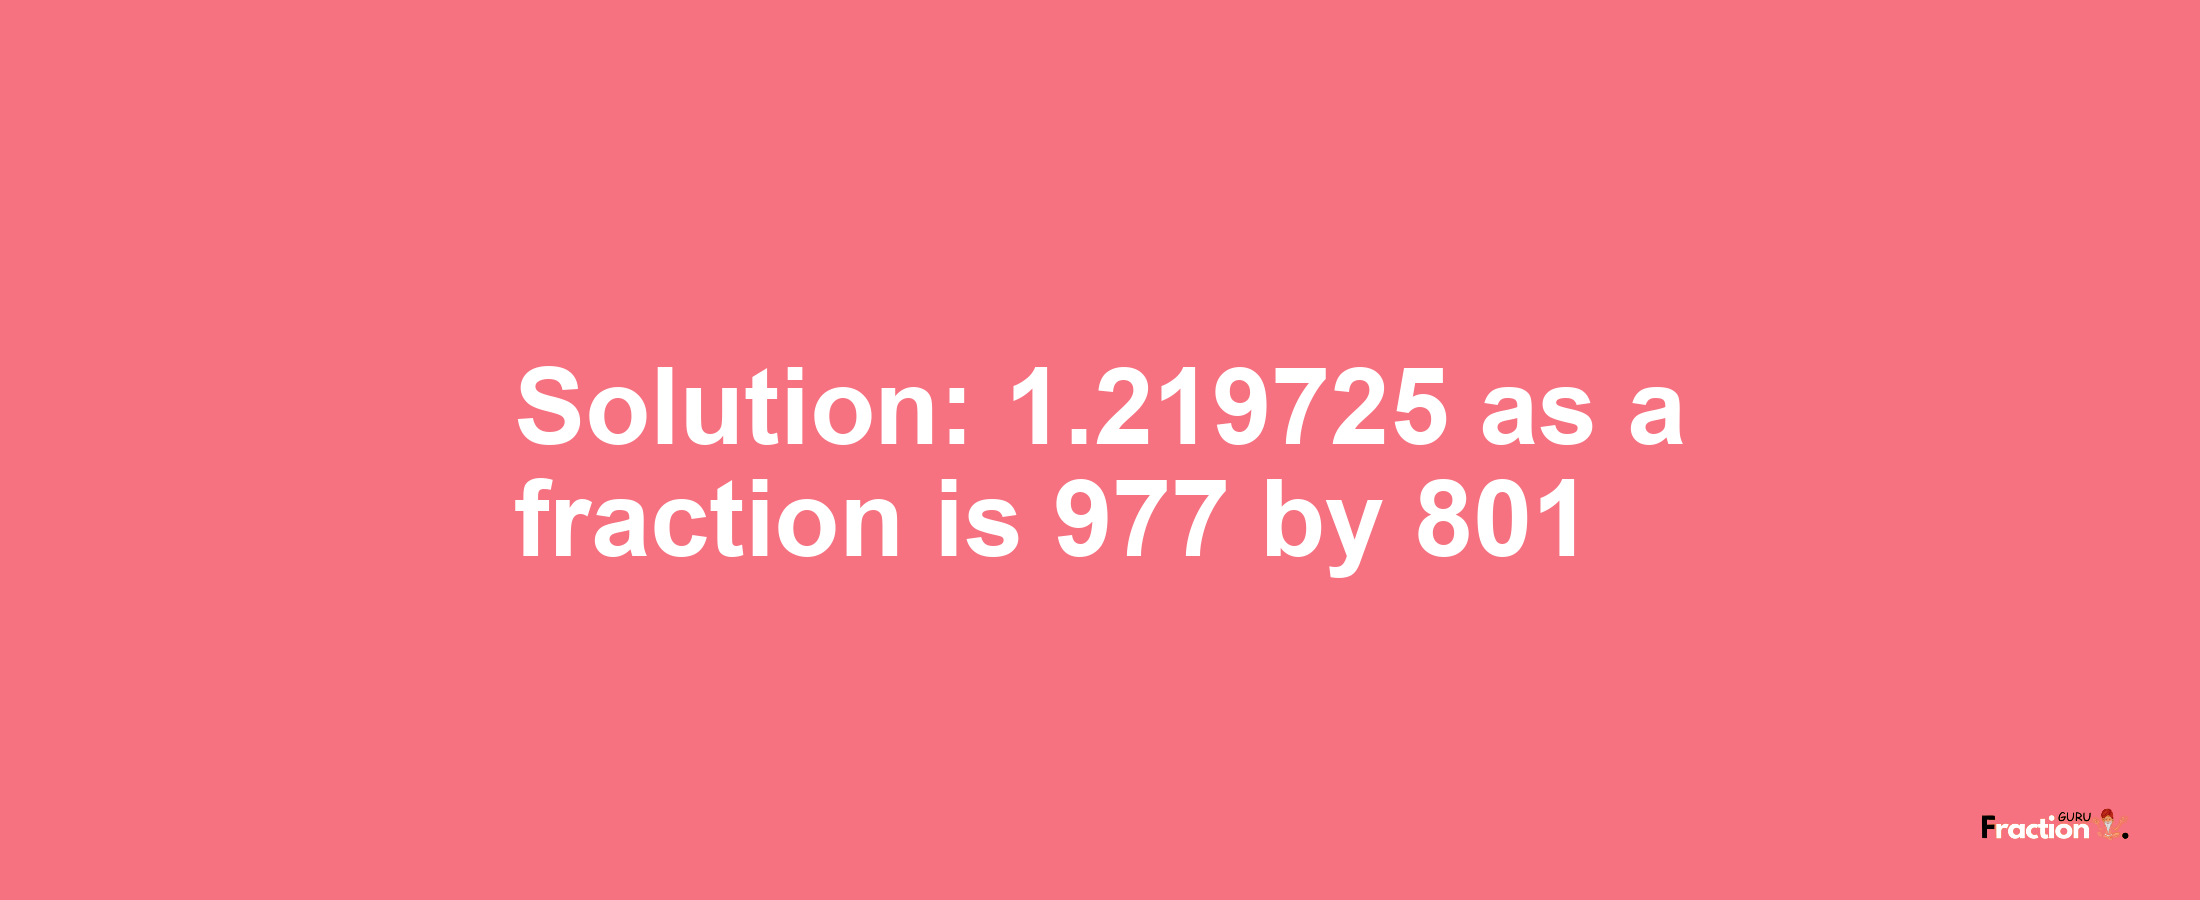 Solution:1.219725 as a fraction is 977/801